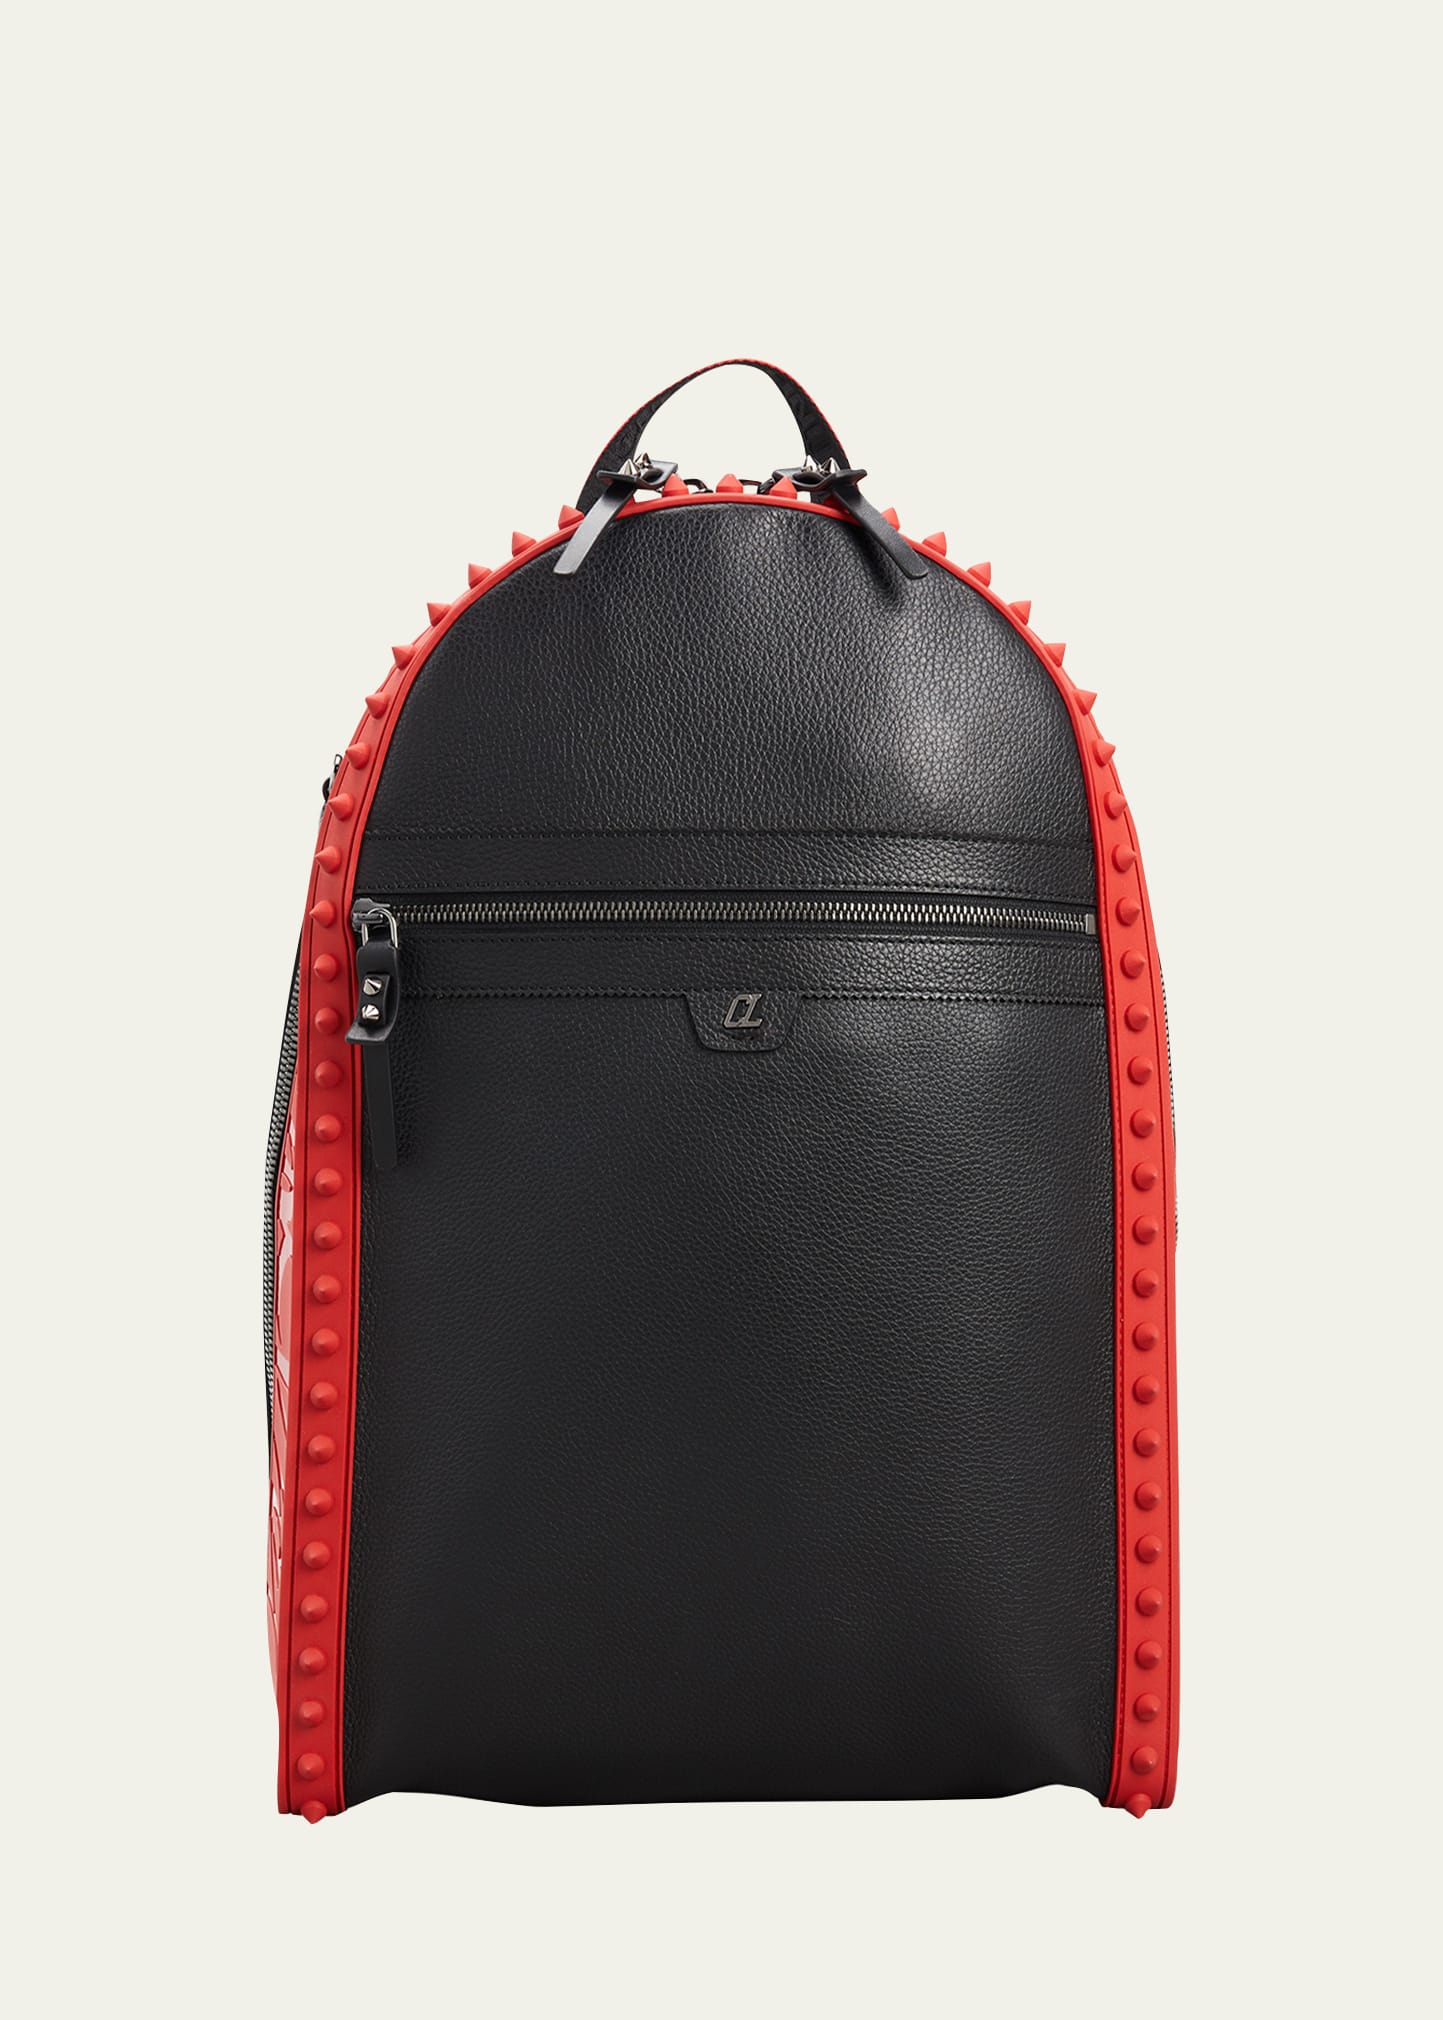 Christian Louboutin Men's Backparis Leather Backpack